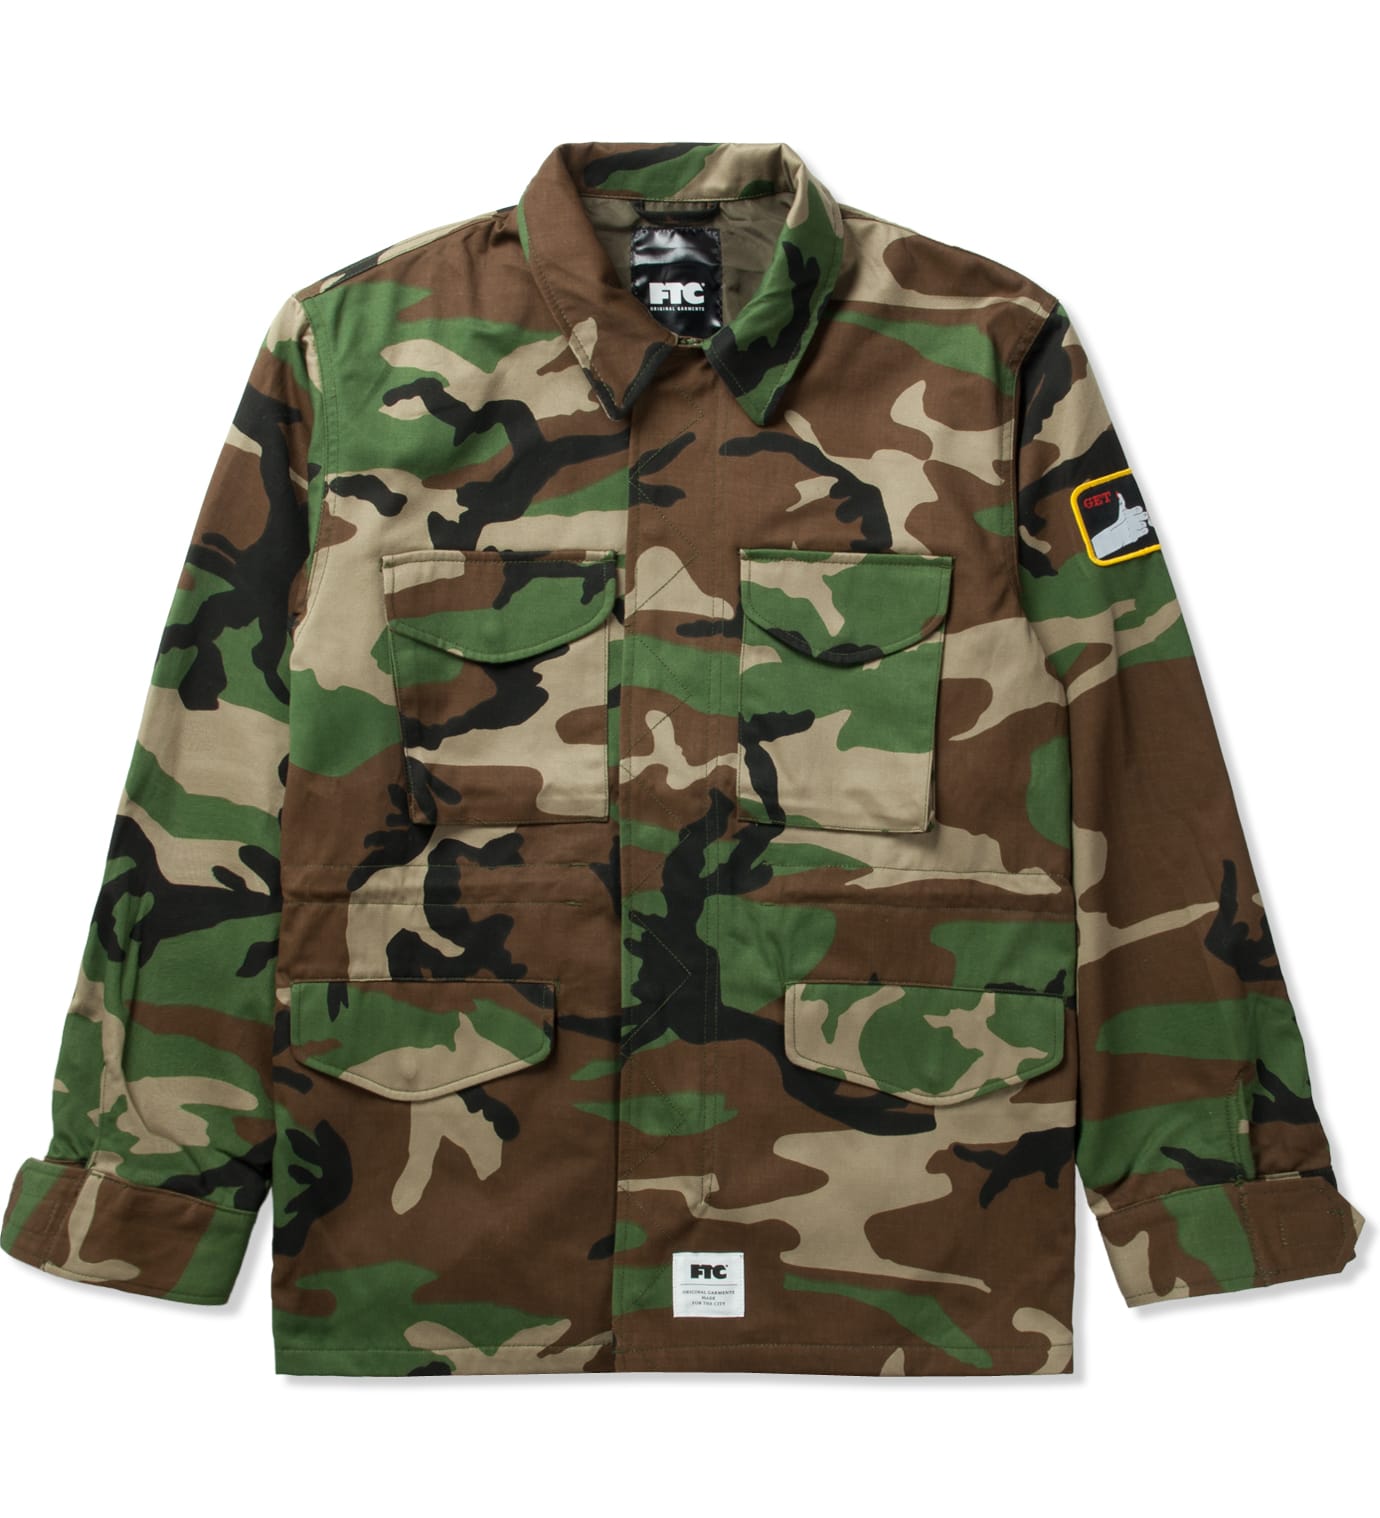 FTC - Camo F65 Jacket | HBX - Globally Curated Fashion and